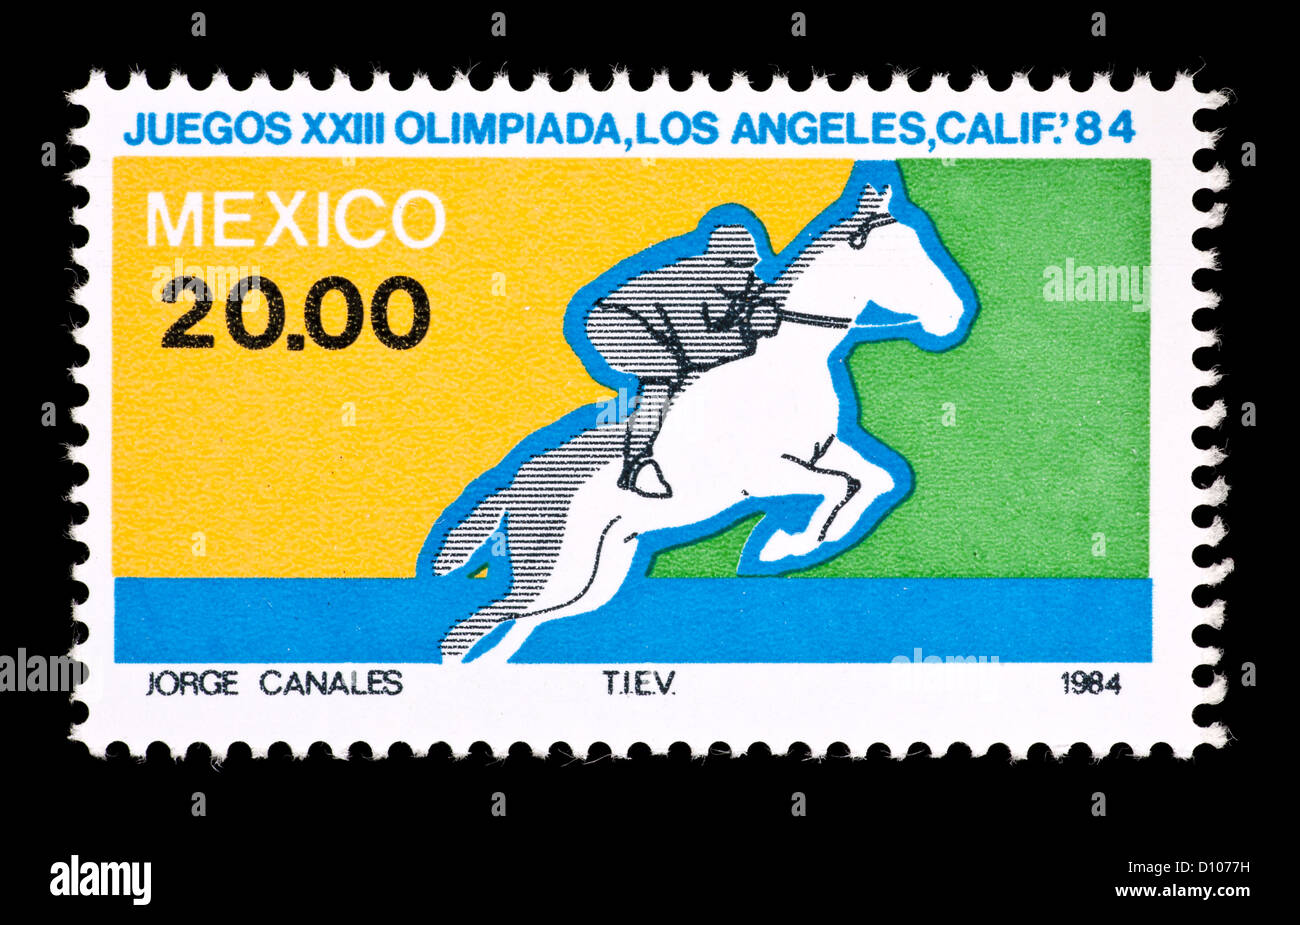 Postage stamp from Mexico depicting a jumping horse, issued for the 1984 SUmmer Olympic Games in Los Angeles. Stock Photo